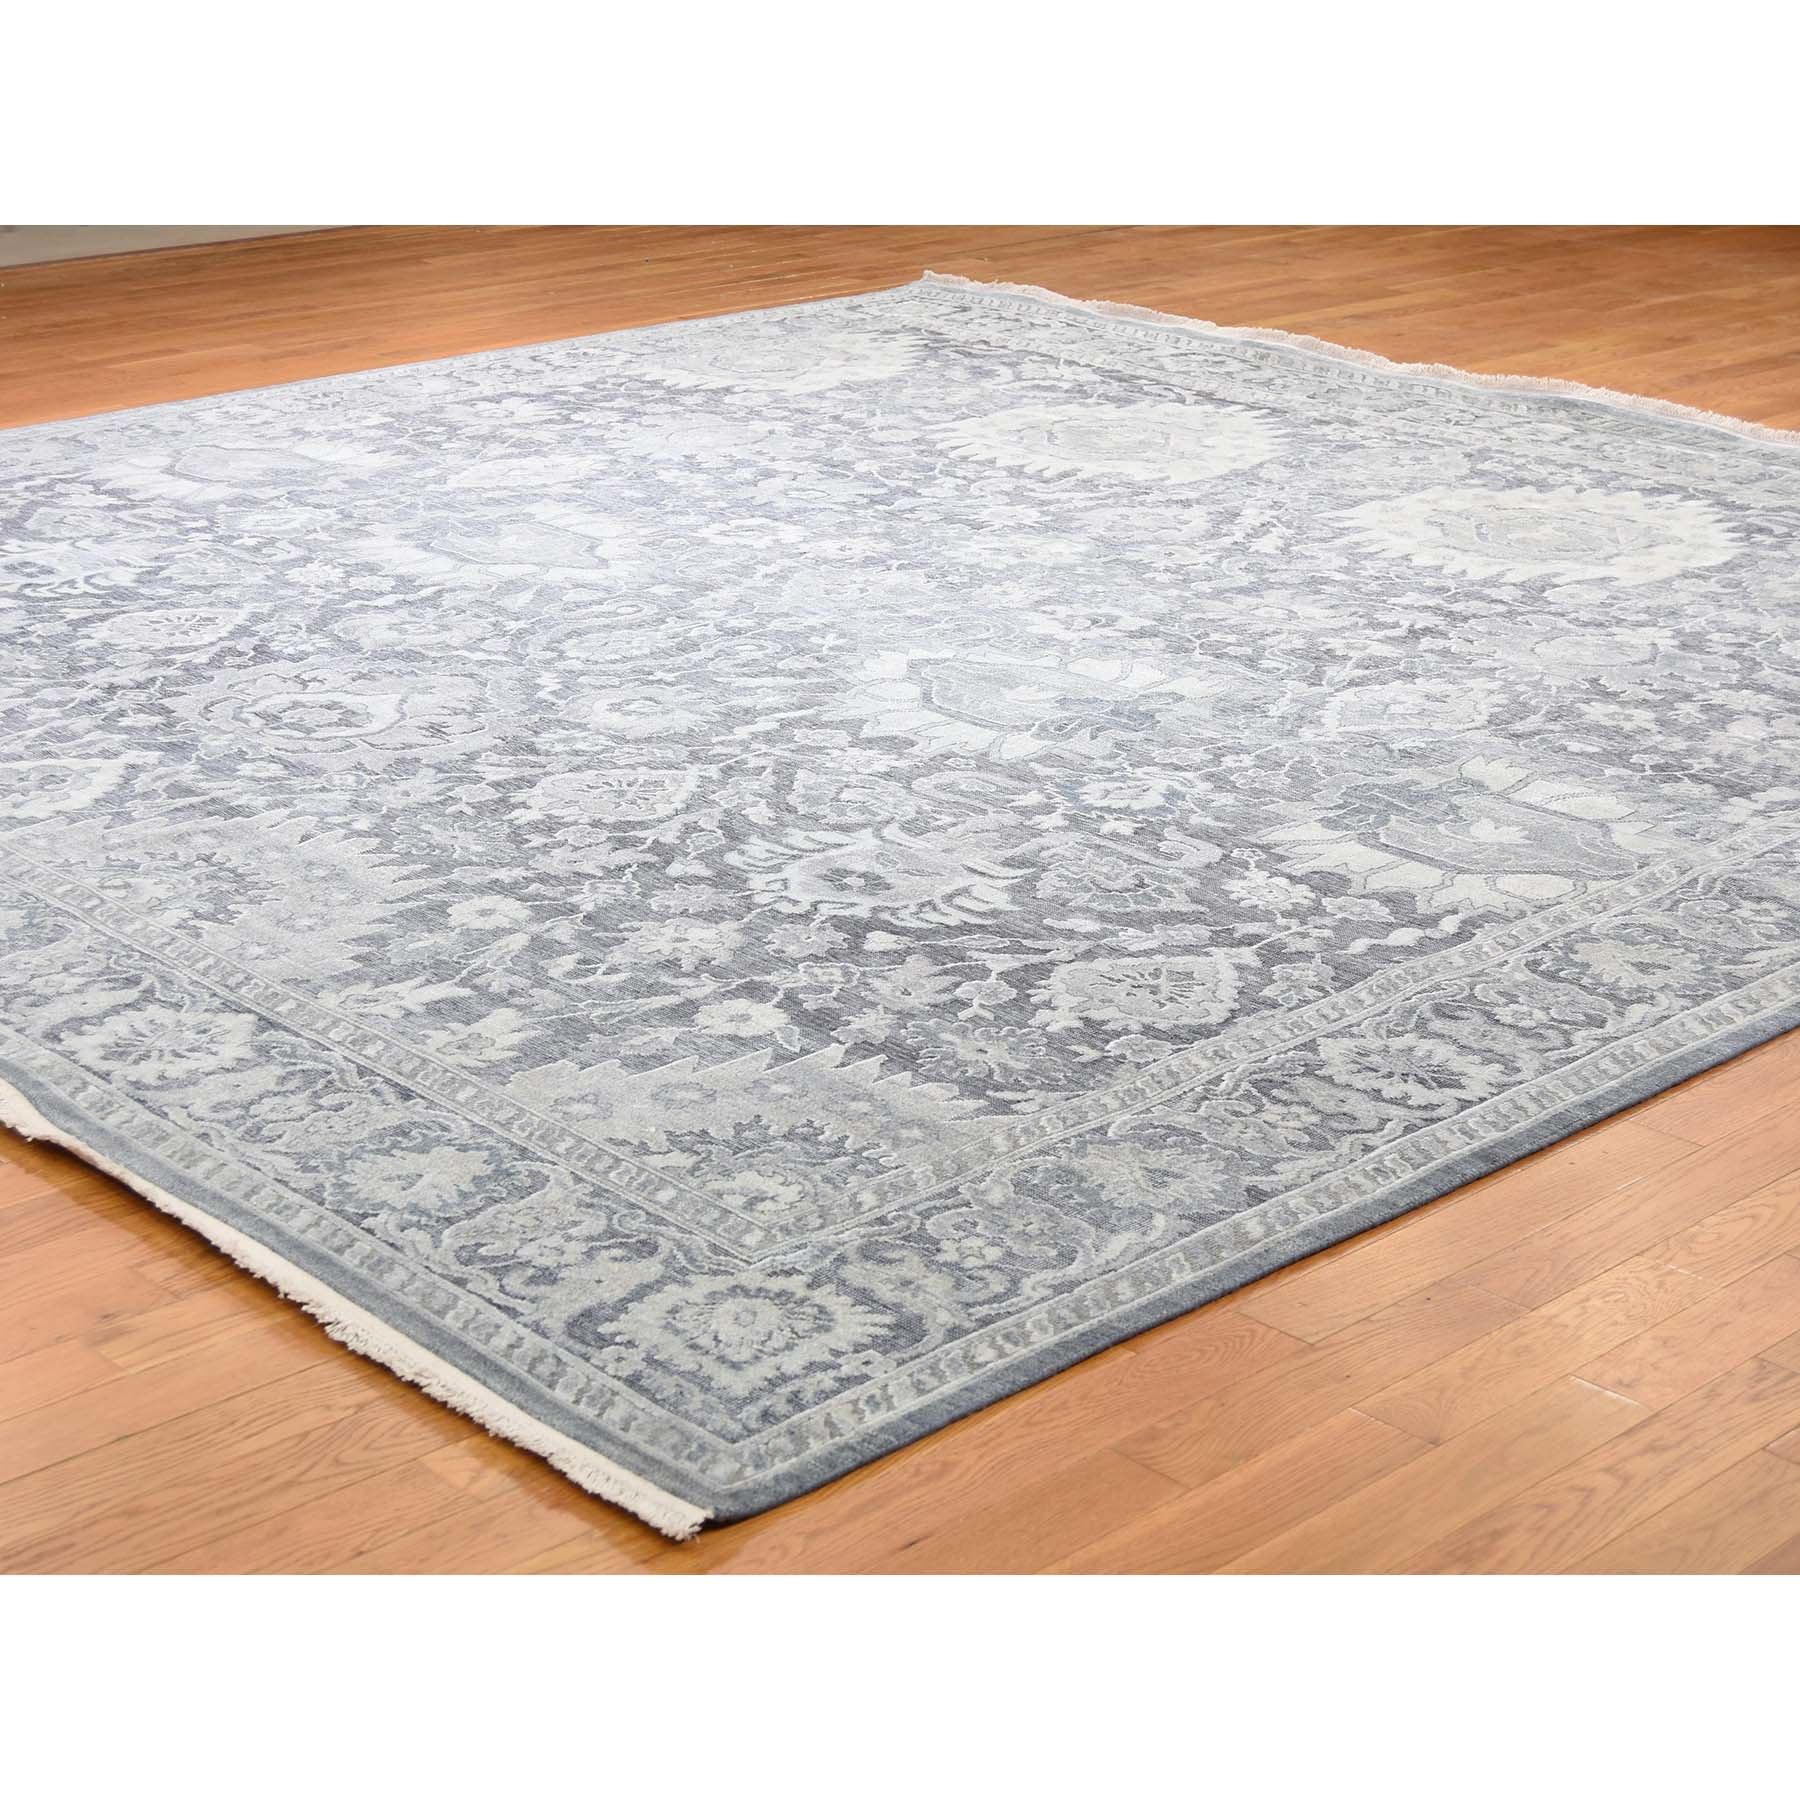 12-x12- Oushak Influence Silk with Textured Wool Hand-Knotted Square Oriental Rug 